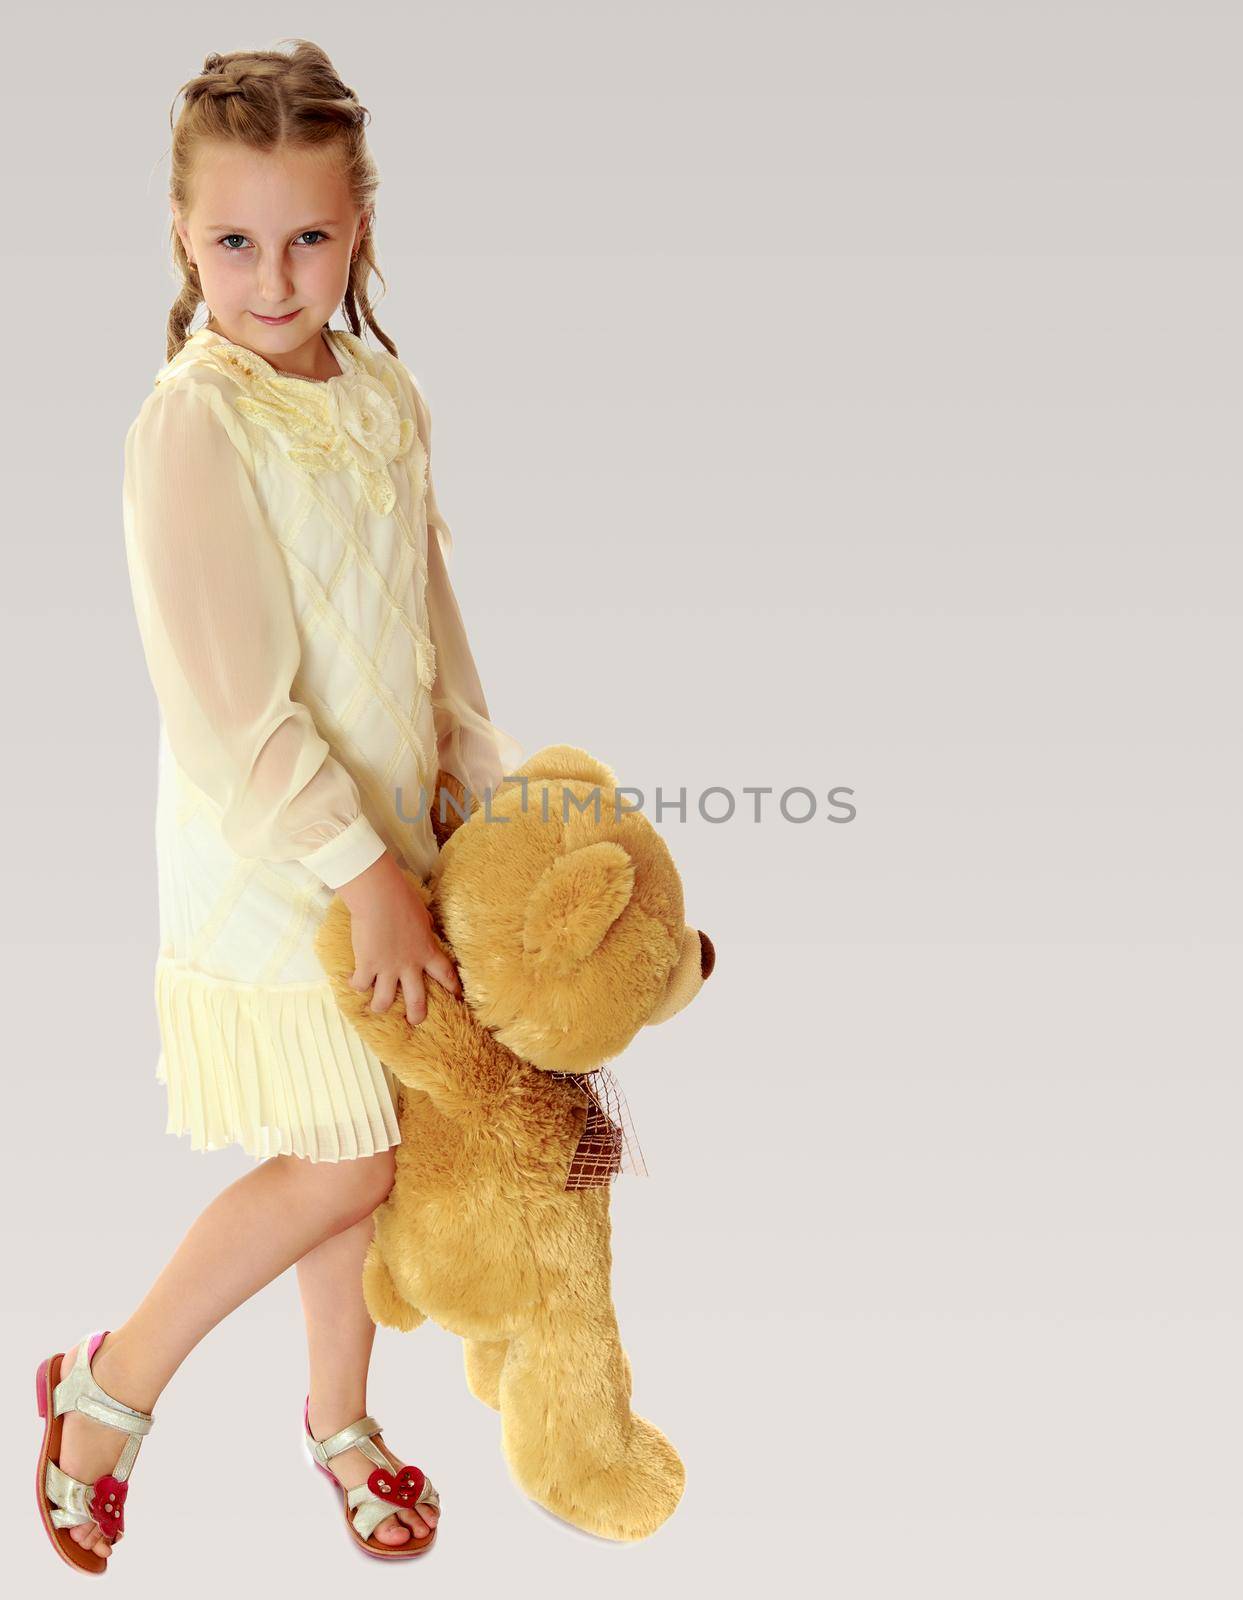 Beautiful little girl in stylish white dress, holding a Teddy bear. Full growth.On a gray background.